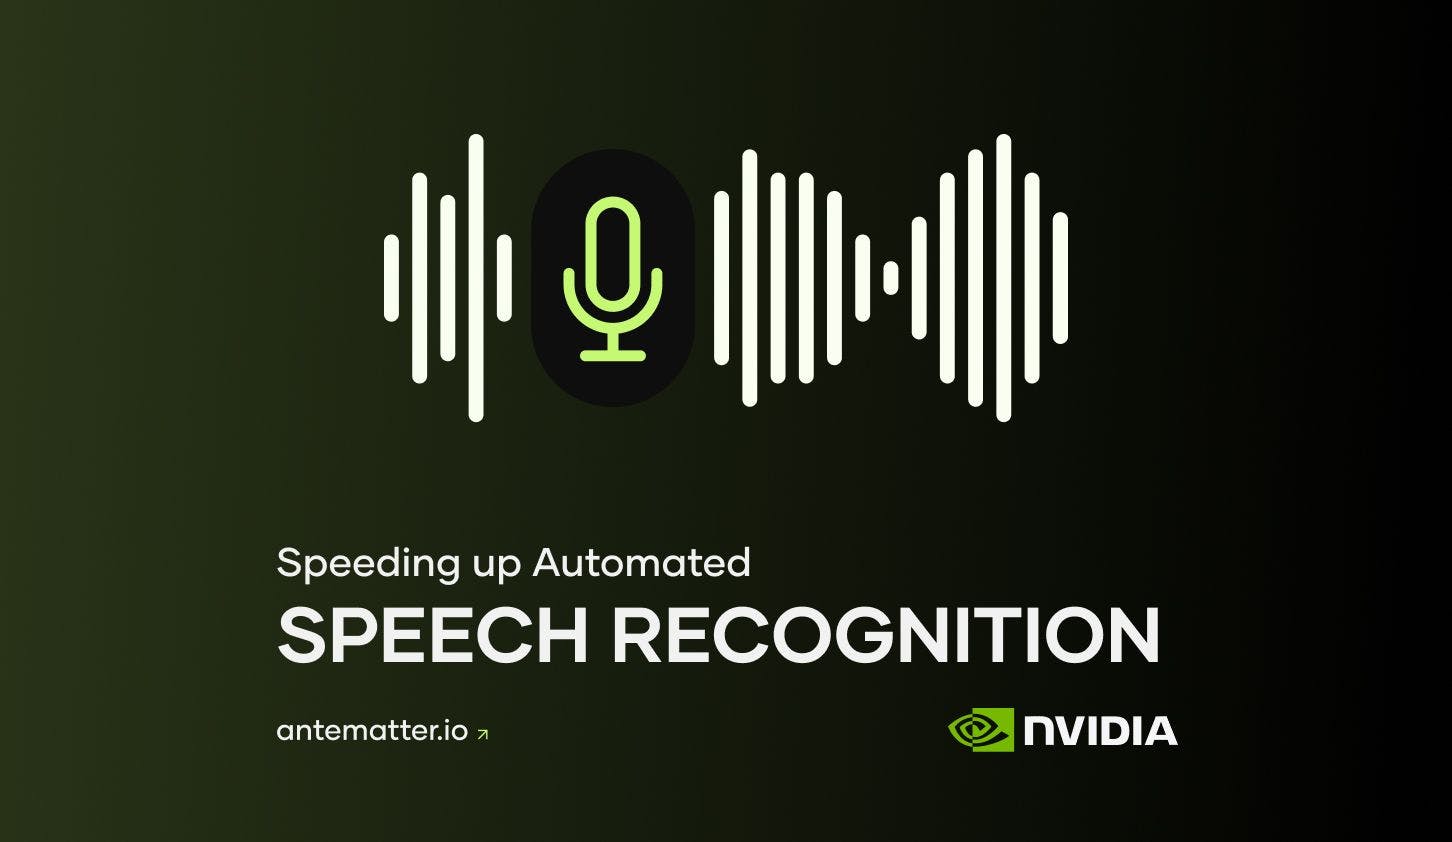 Speeding up Automated Speech Recognition